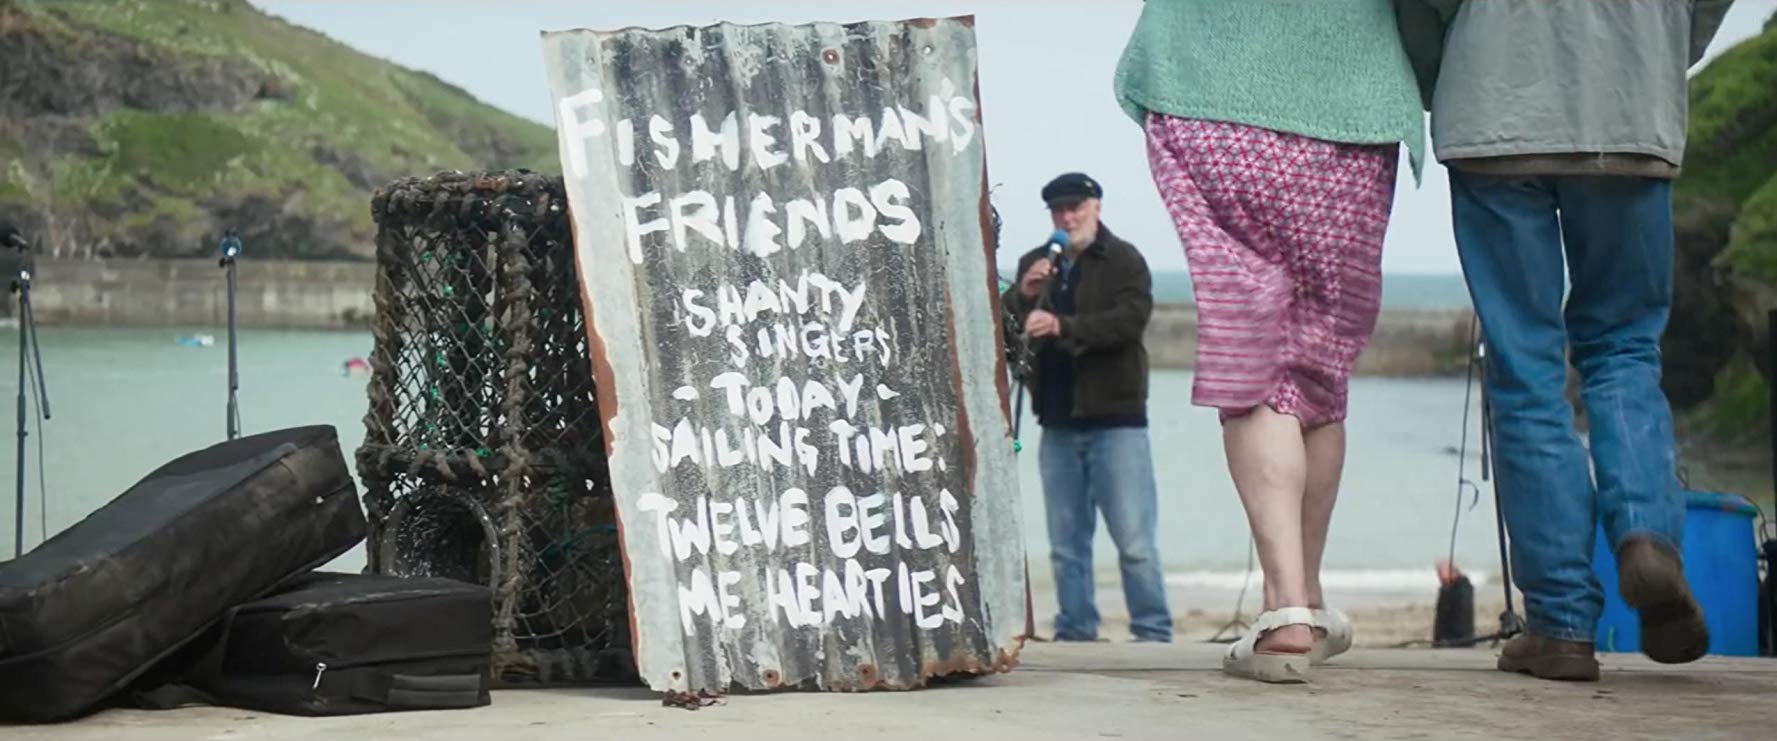 Fisherman’s Friends review: a hit for the elderly